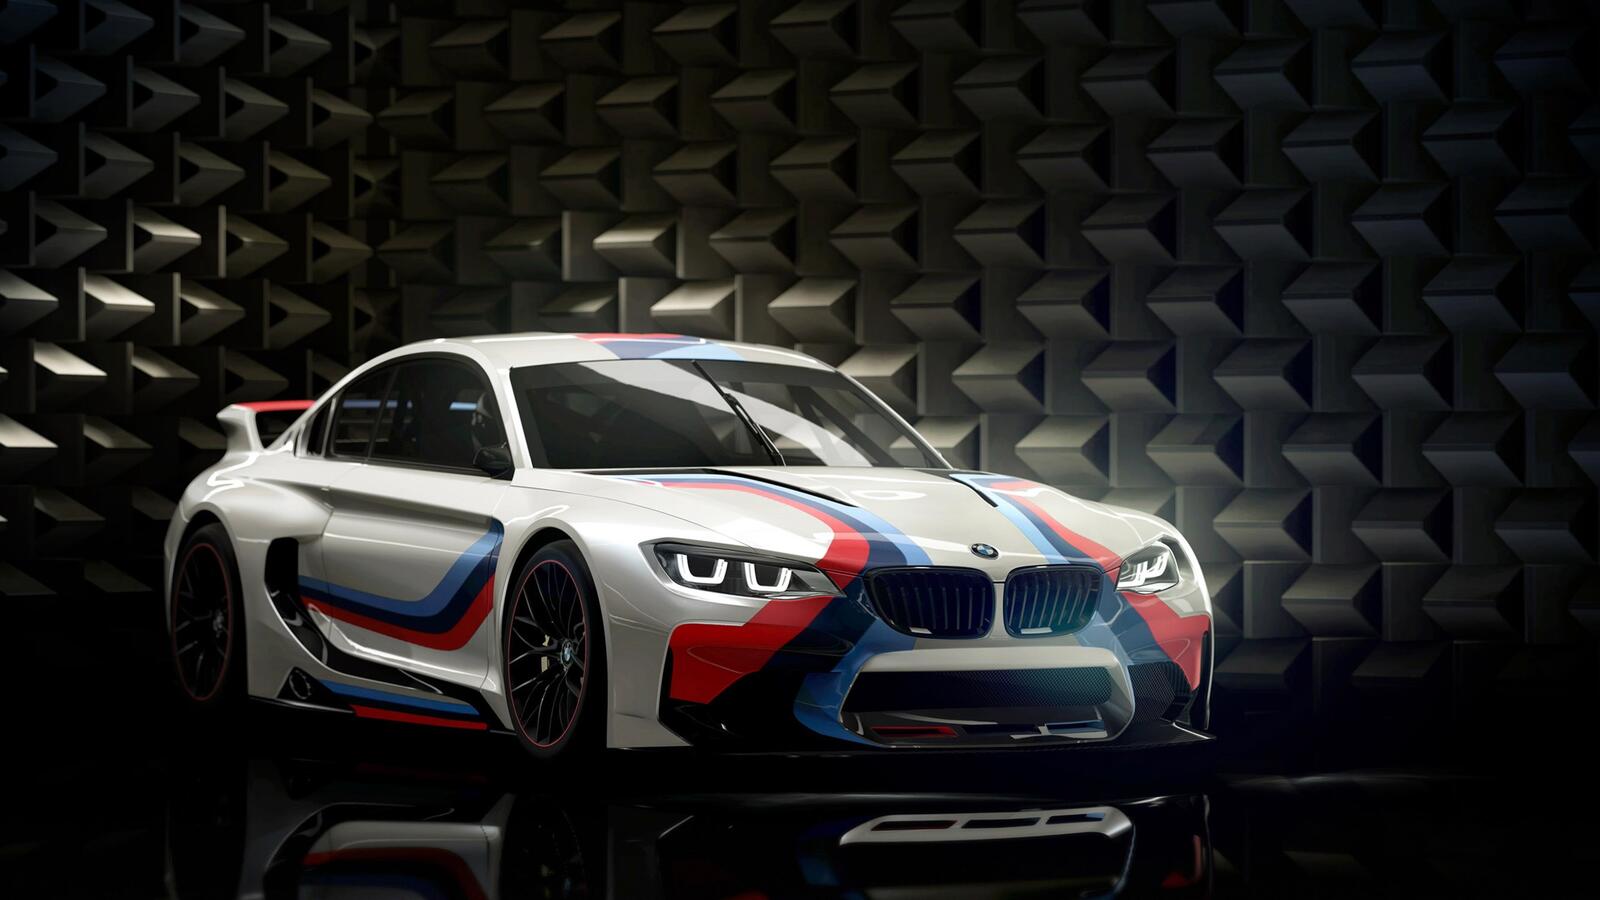 Wallpapers BMW cars Concept Cars on the desktop